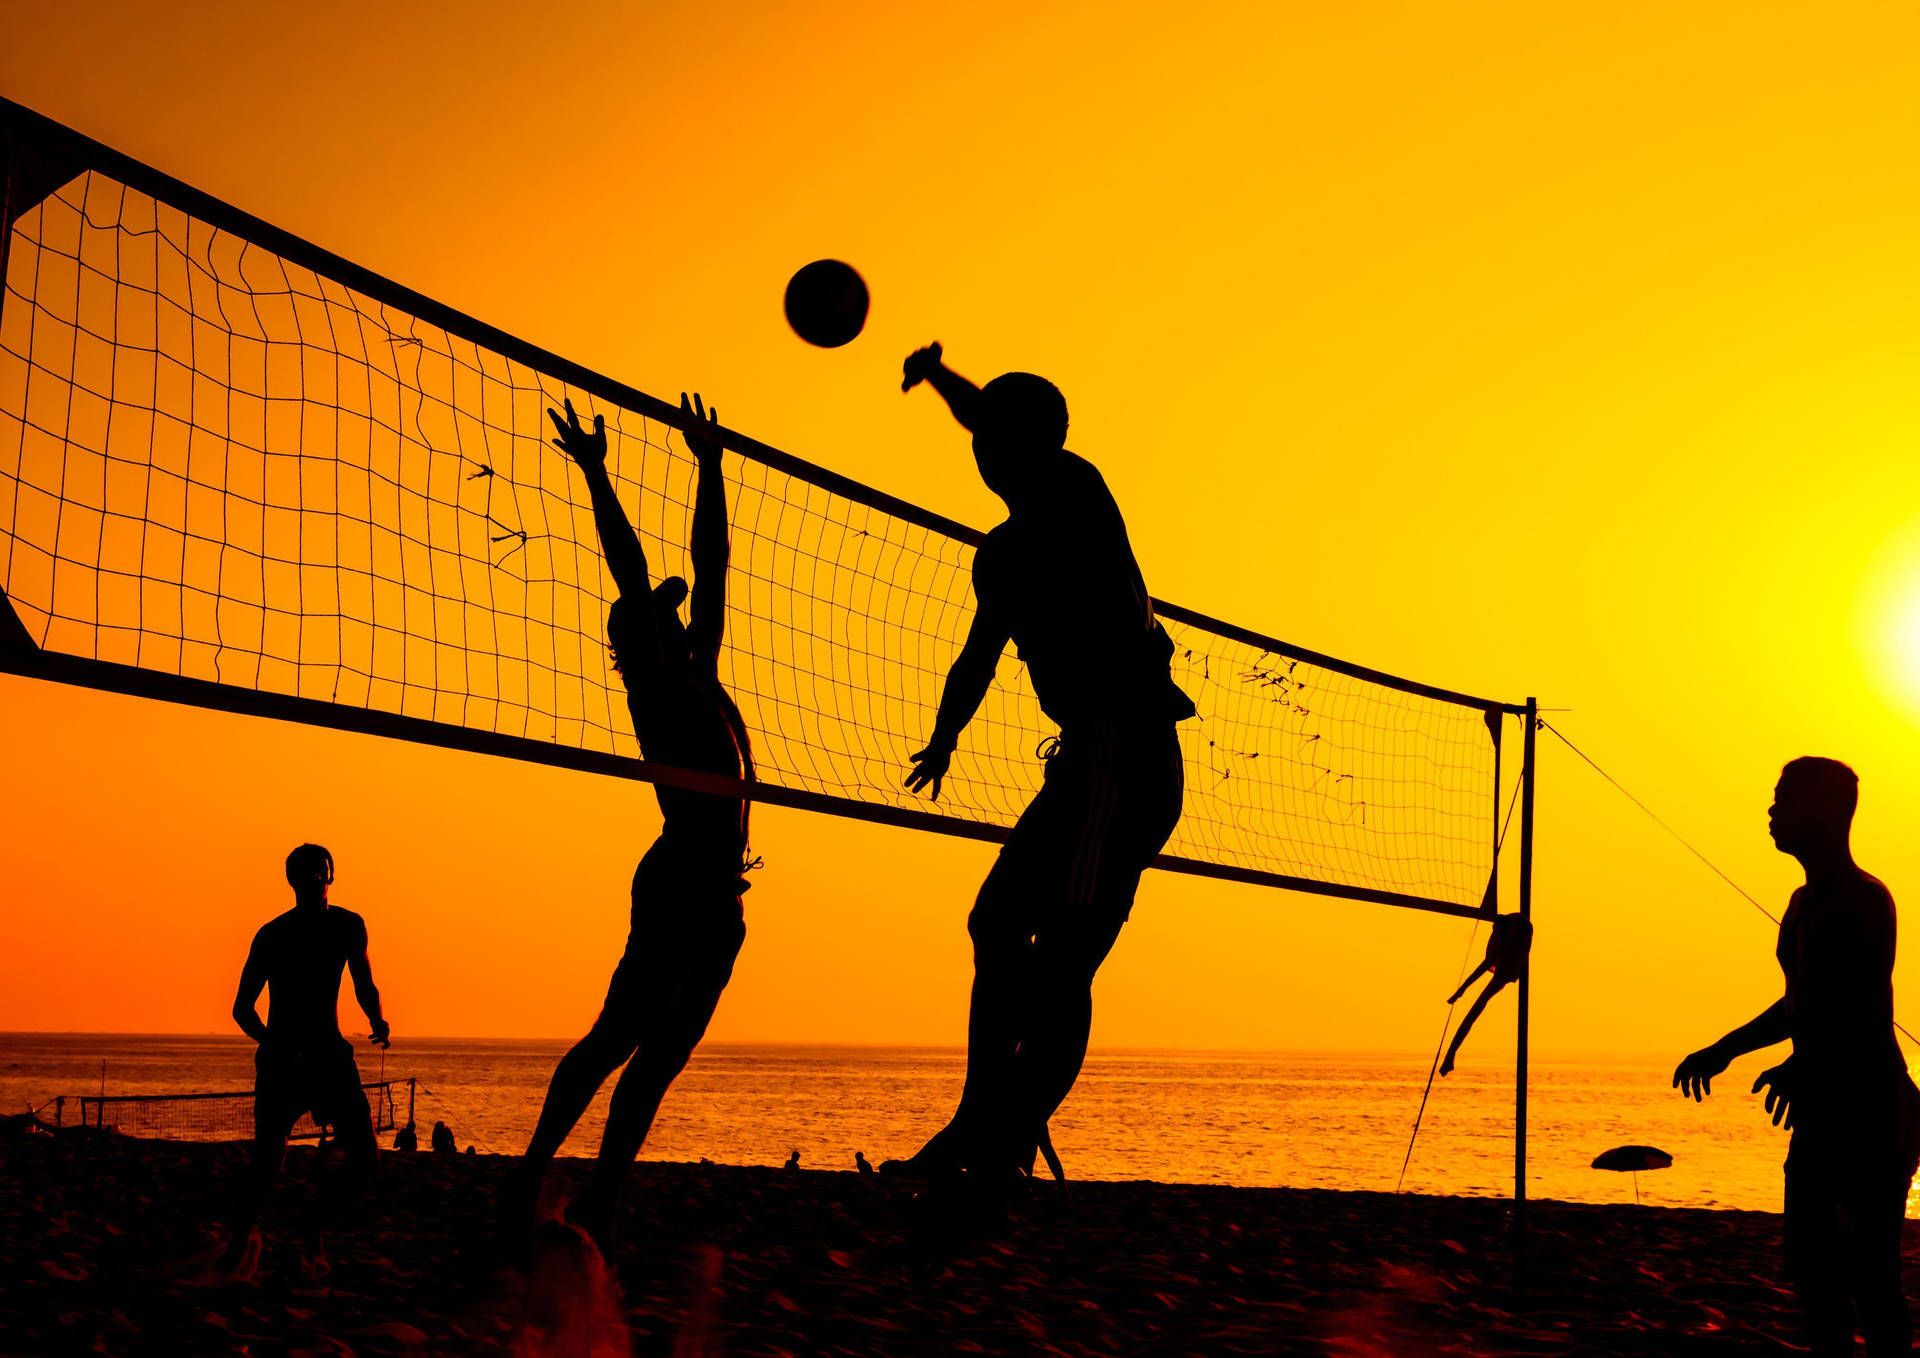 Free Volleyball Wallpaper Downloads, Volleyball Wallpaper for FREE